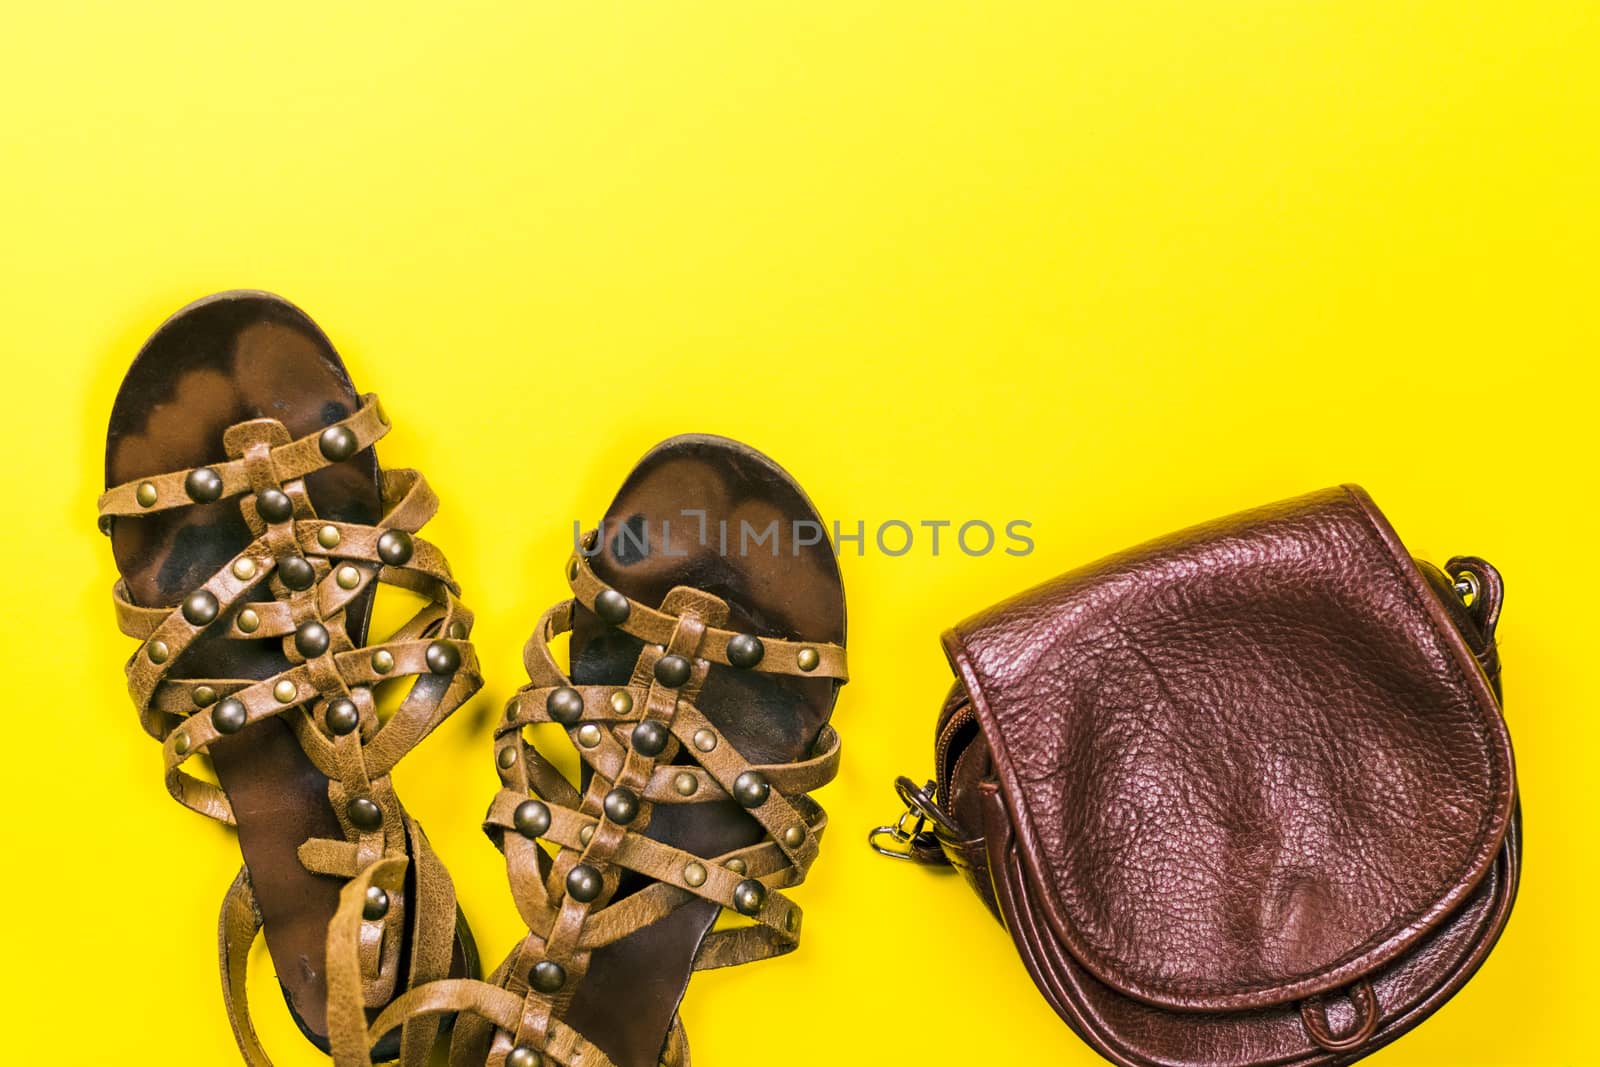 Sandals, bag on a colored background